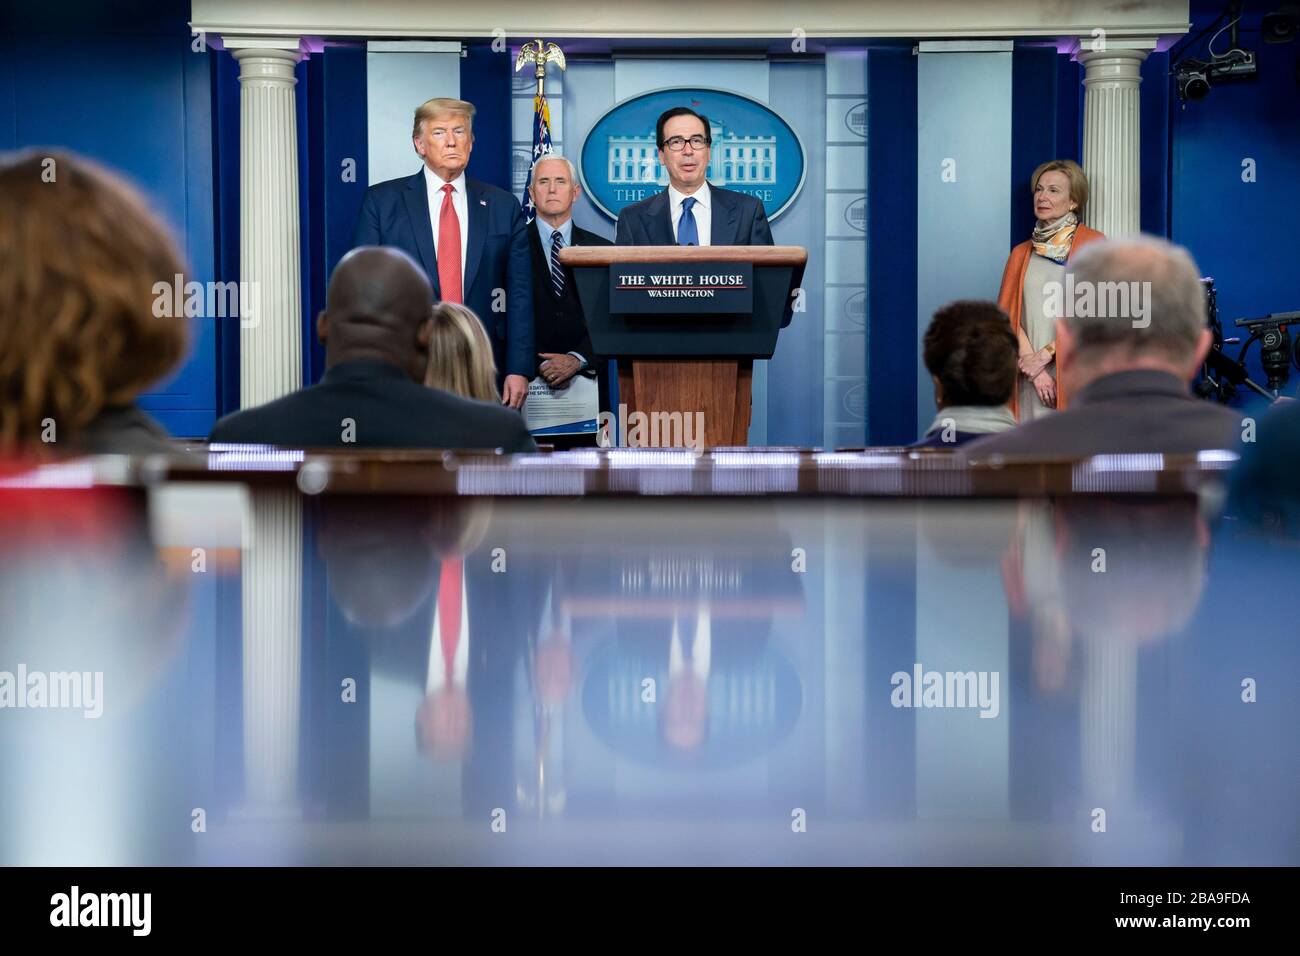 Washington, United States Of America. 25th Mar, 2020. Washington, United States of America. 25 March, 2020. U.S Secretary of the Treasury Steven Mnuchin, joined by President Donald Trump and Vice President Mike Pence, addresses remarks on the stimulus package at the Coronavirus Task Force briefing in the Press Briefing Room of the White House March 25, 2020 in Washington, DC. Credit: Tia Dufour/White House Photo/Alamy Live News Stock Photo